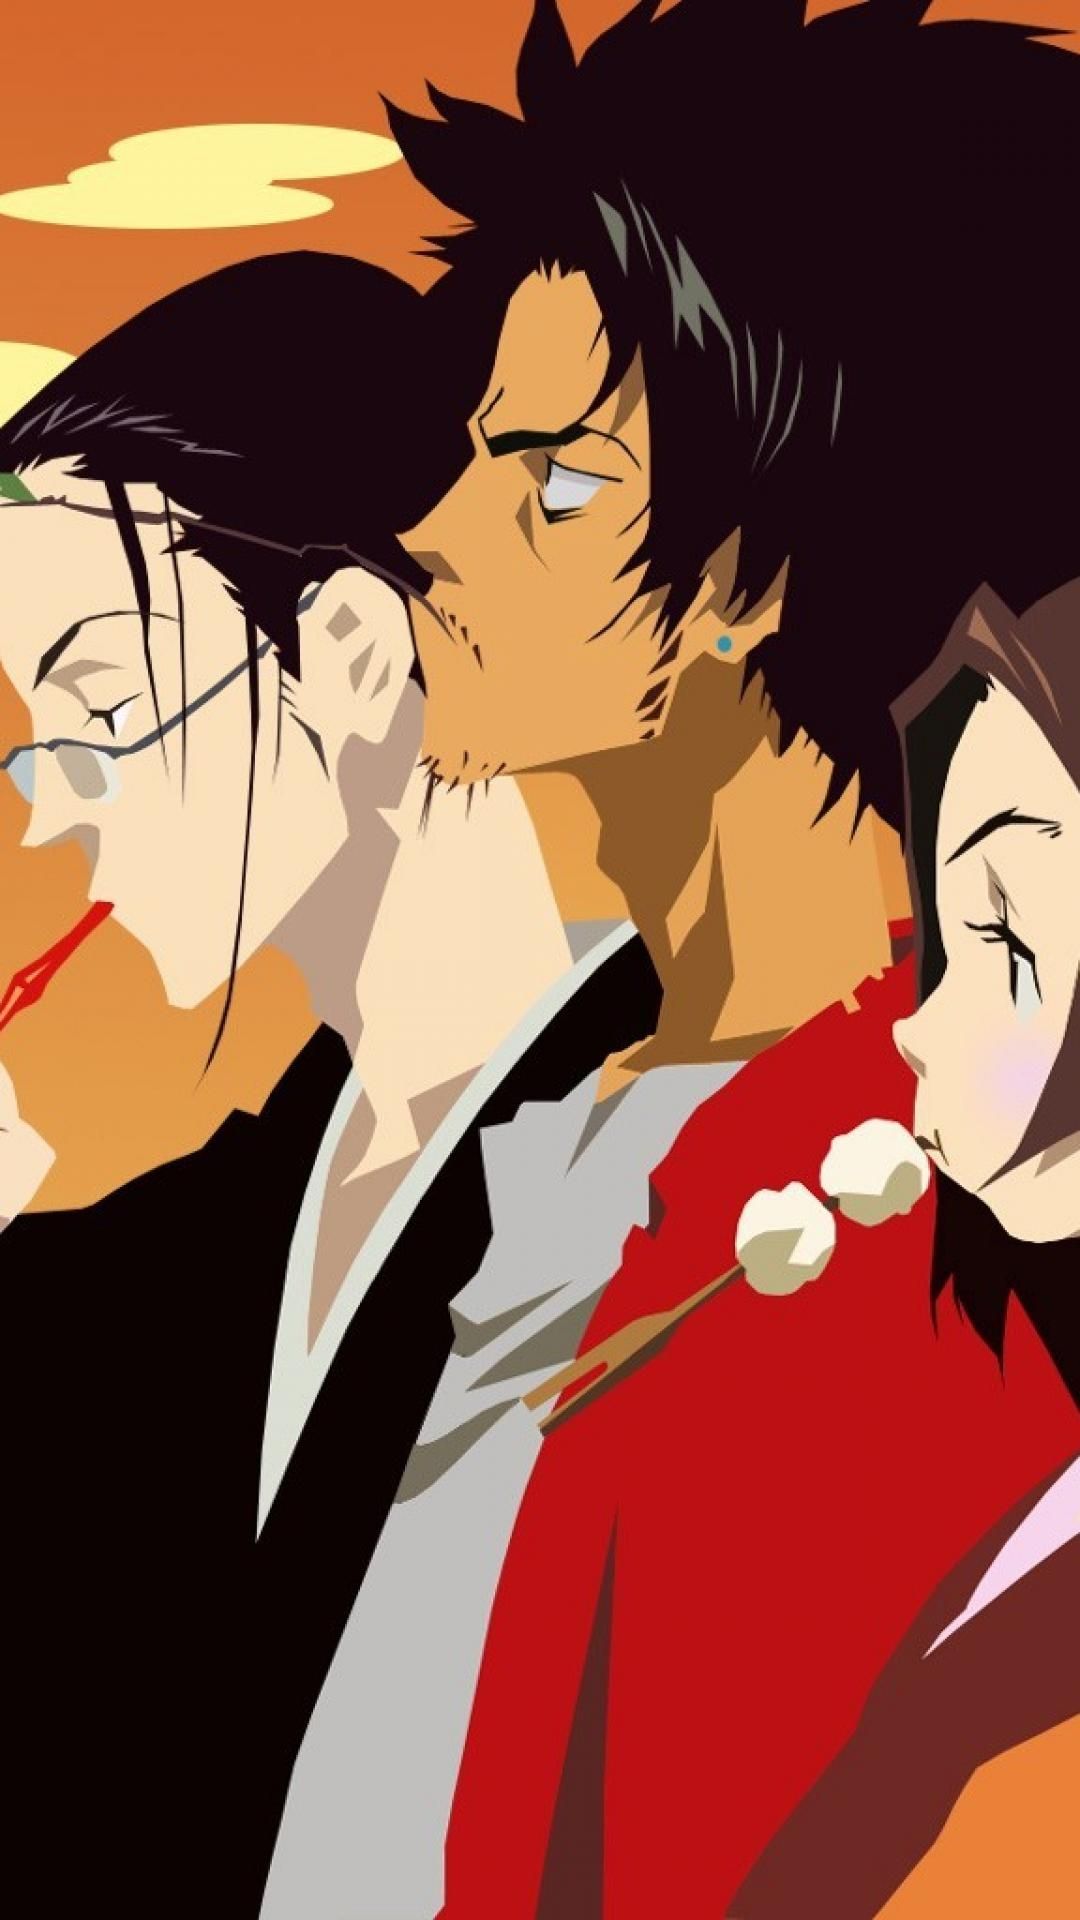 15 Samurai Champloo Wallpapers for iPhone and Android by Lori Shaffer